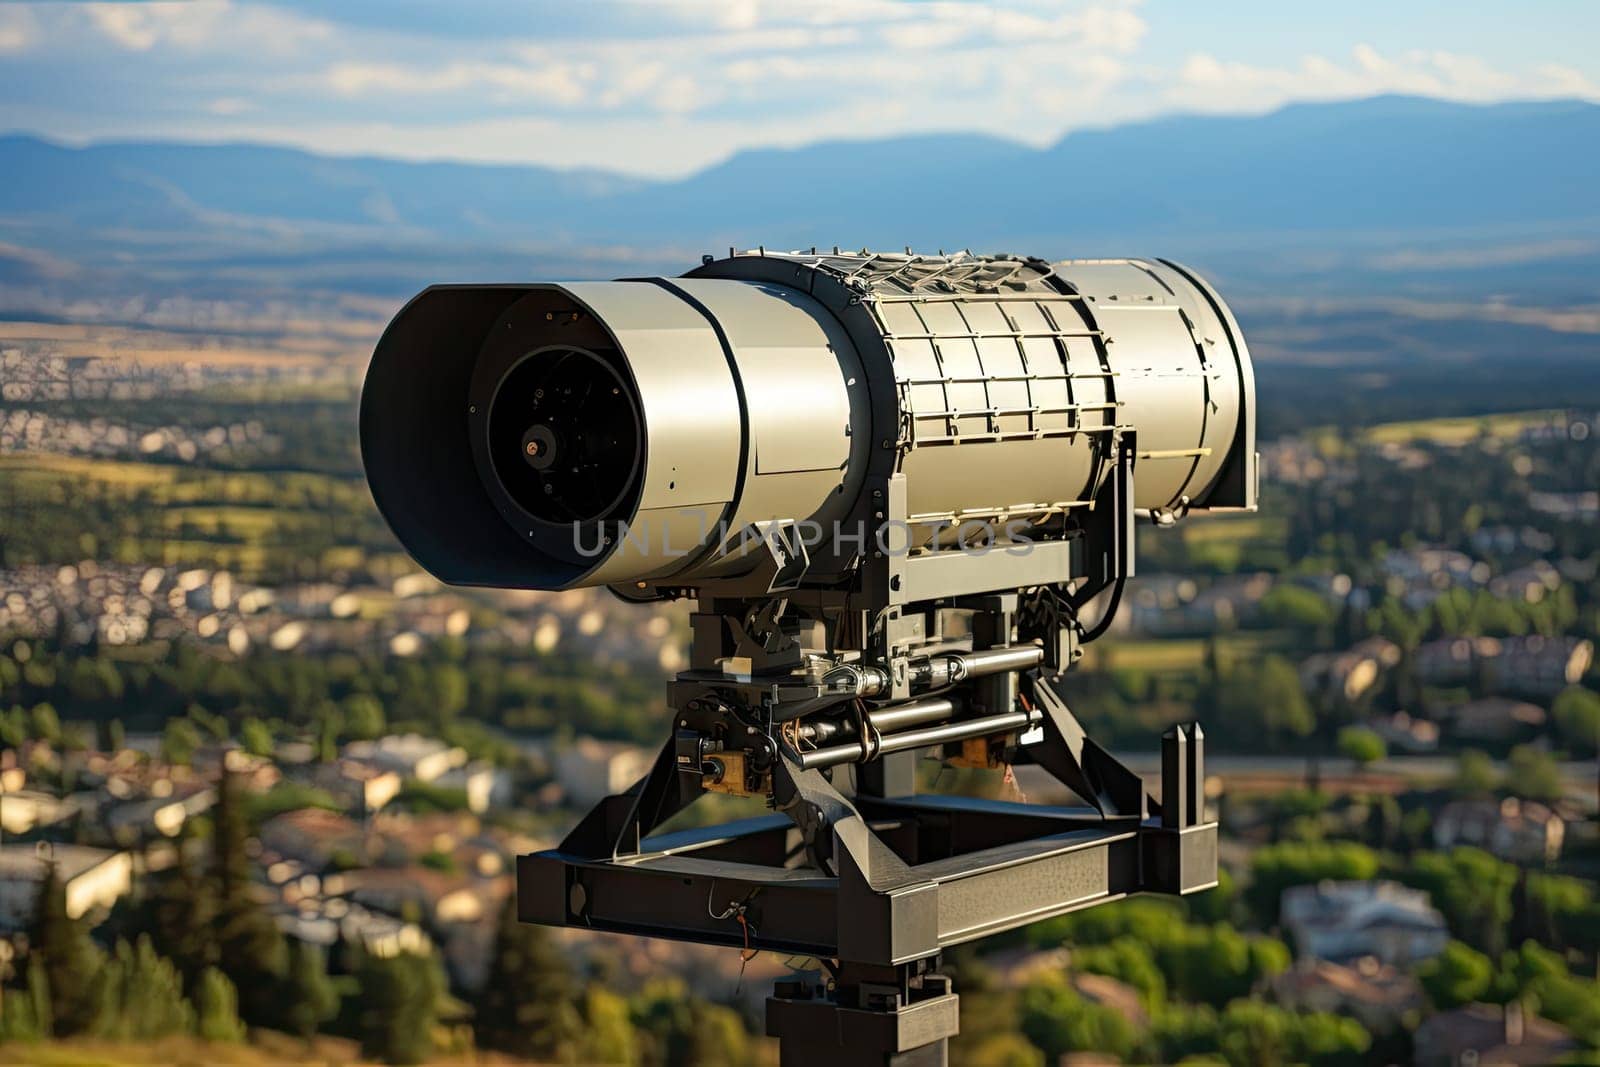 a telescope on top of a tripod with mountains in the distance and blue sky above it, as seen from an overlook point